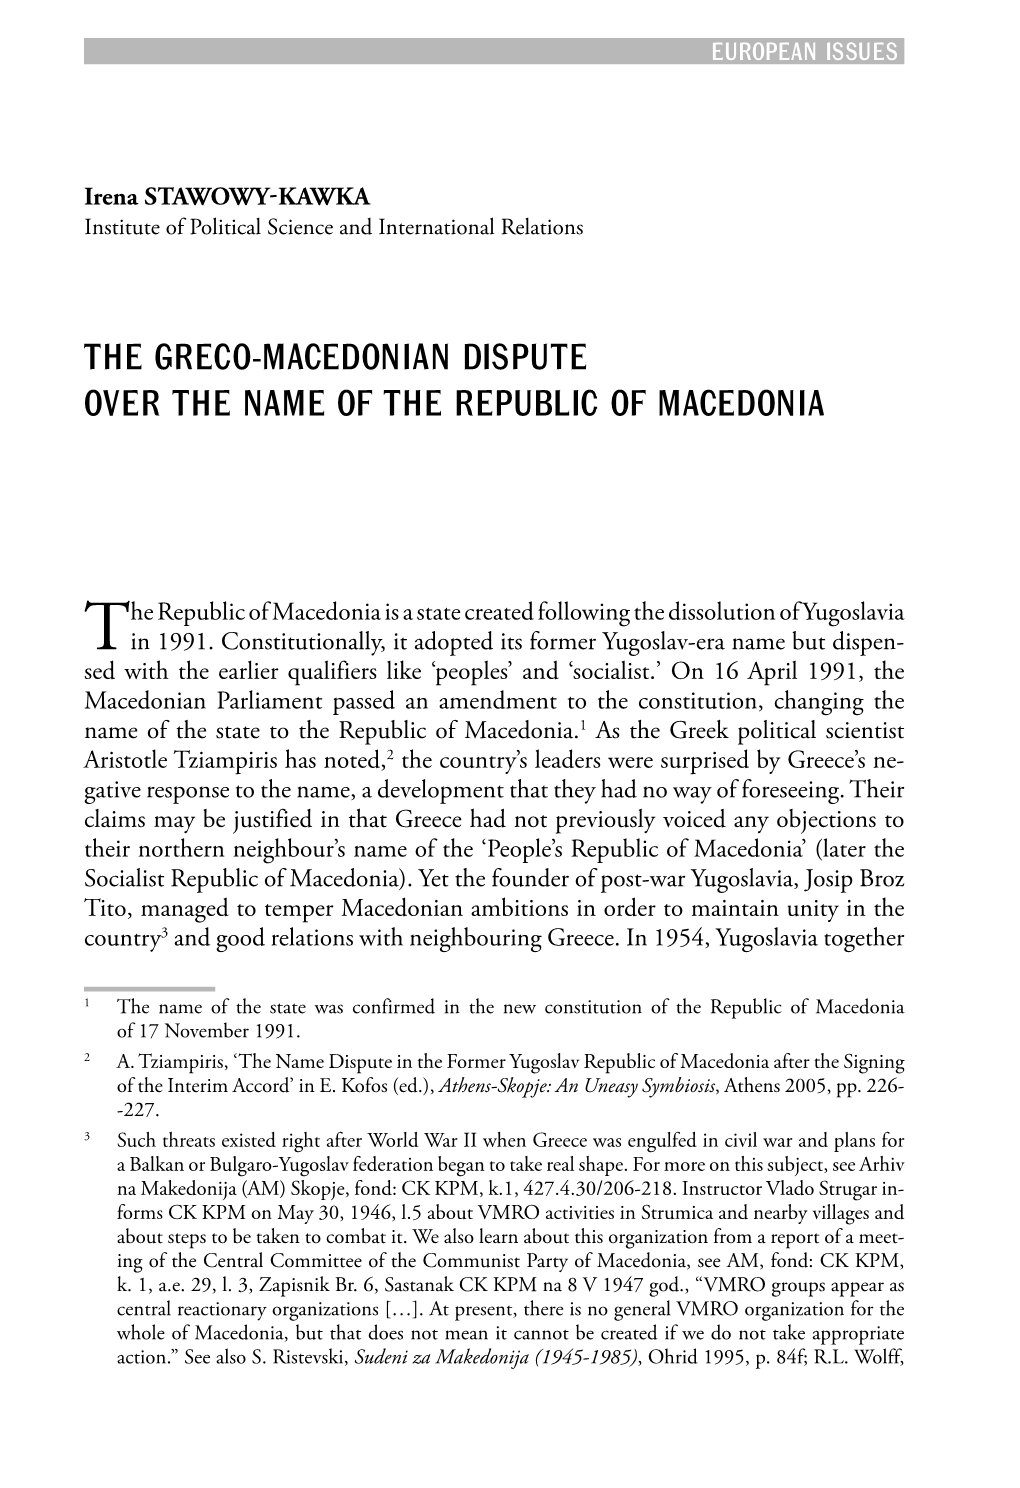 The Greco-Macedonian Dispute Over the Name of the Republic of Macedonia